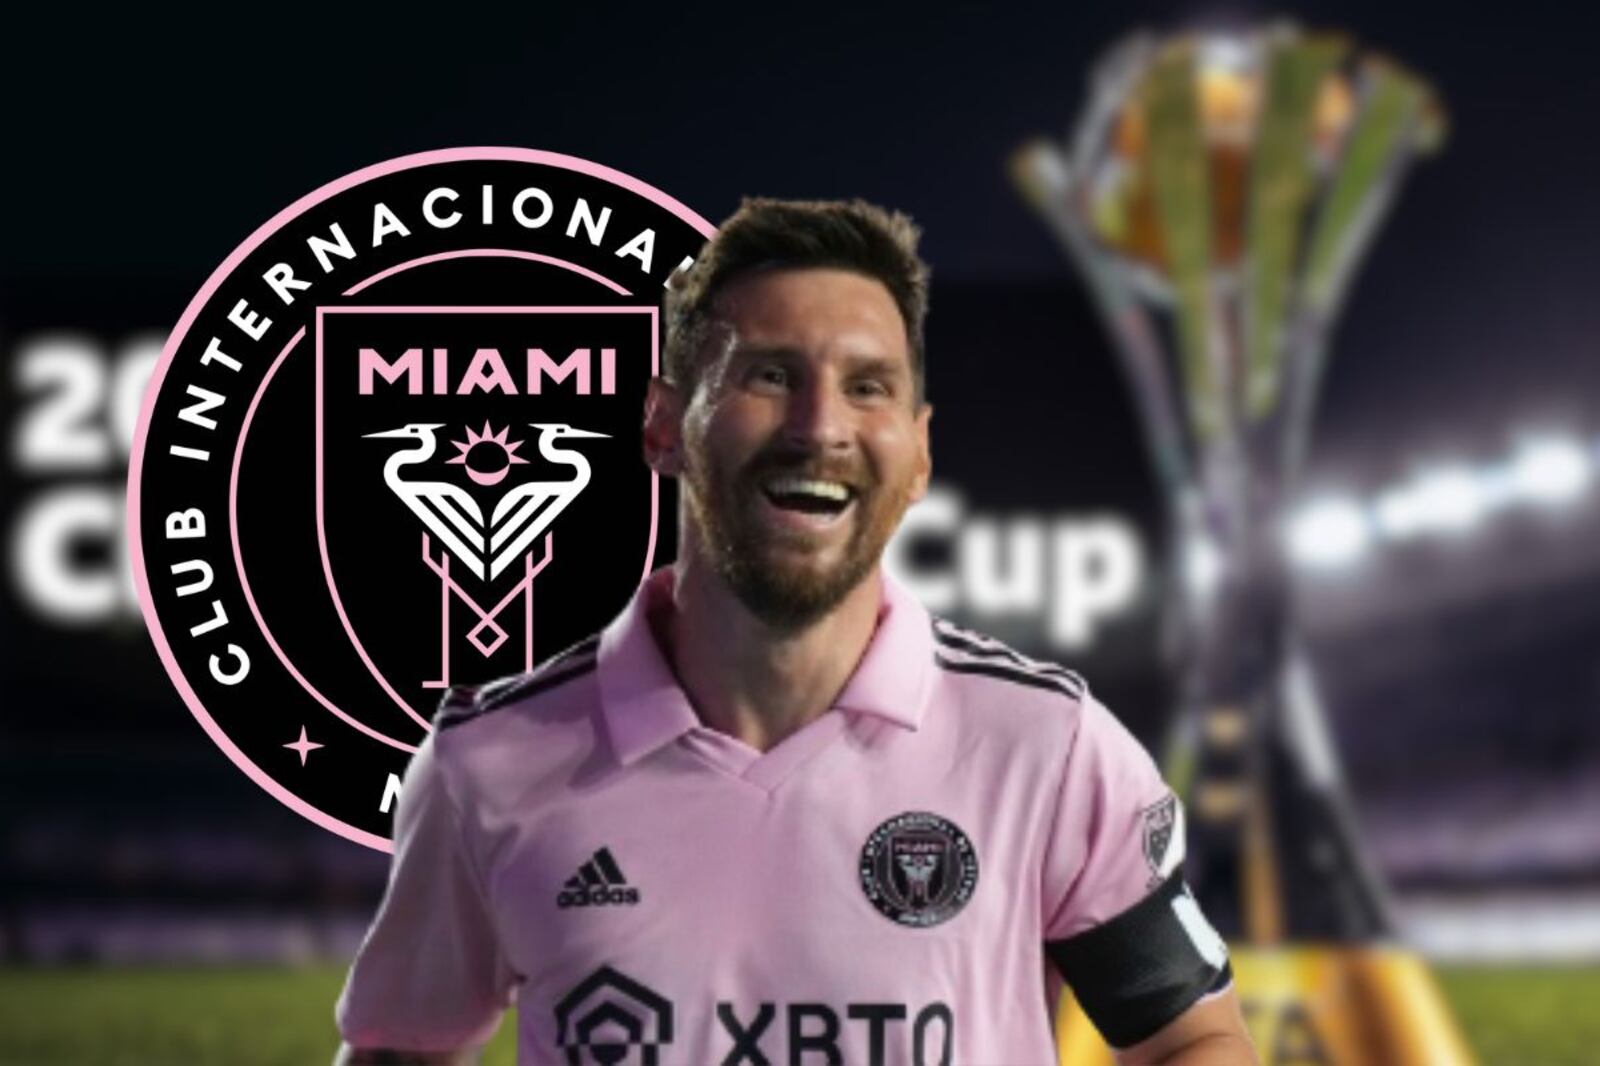 The new FIFA World Club Cup sponsor that may help Messi and Inter Miami to play the tournament